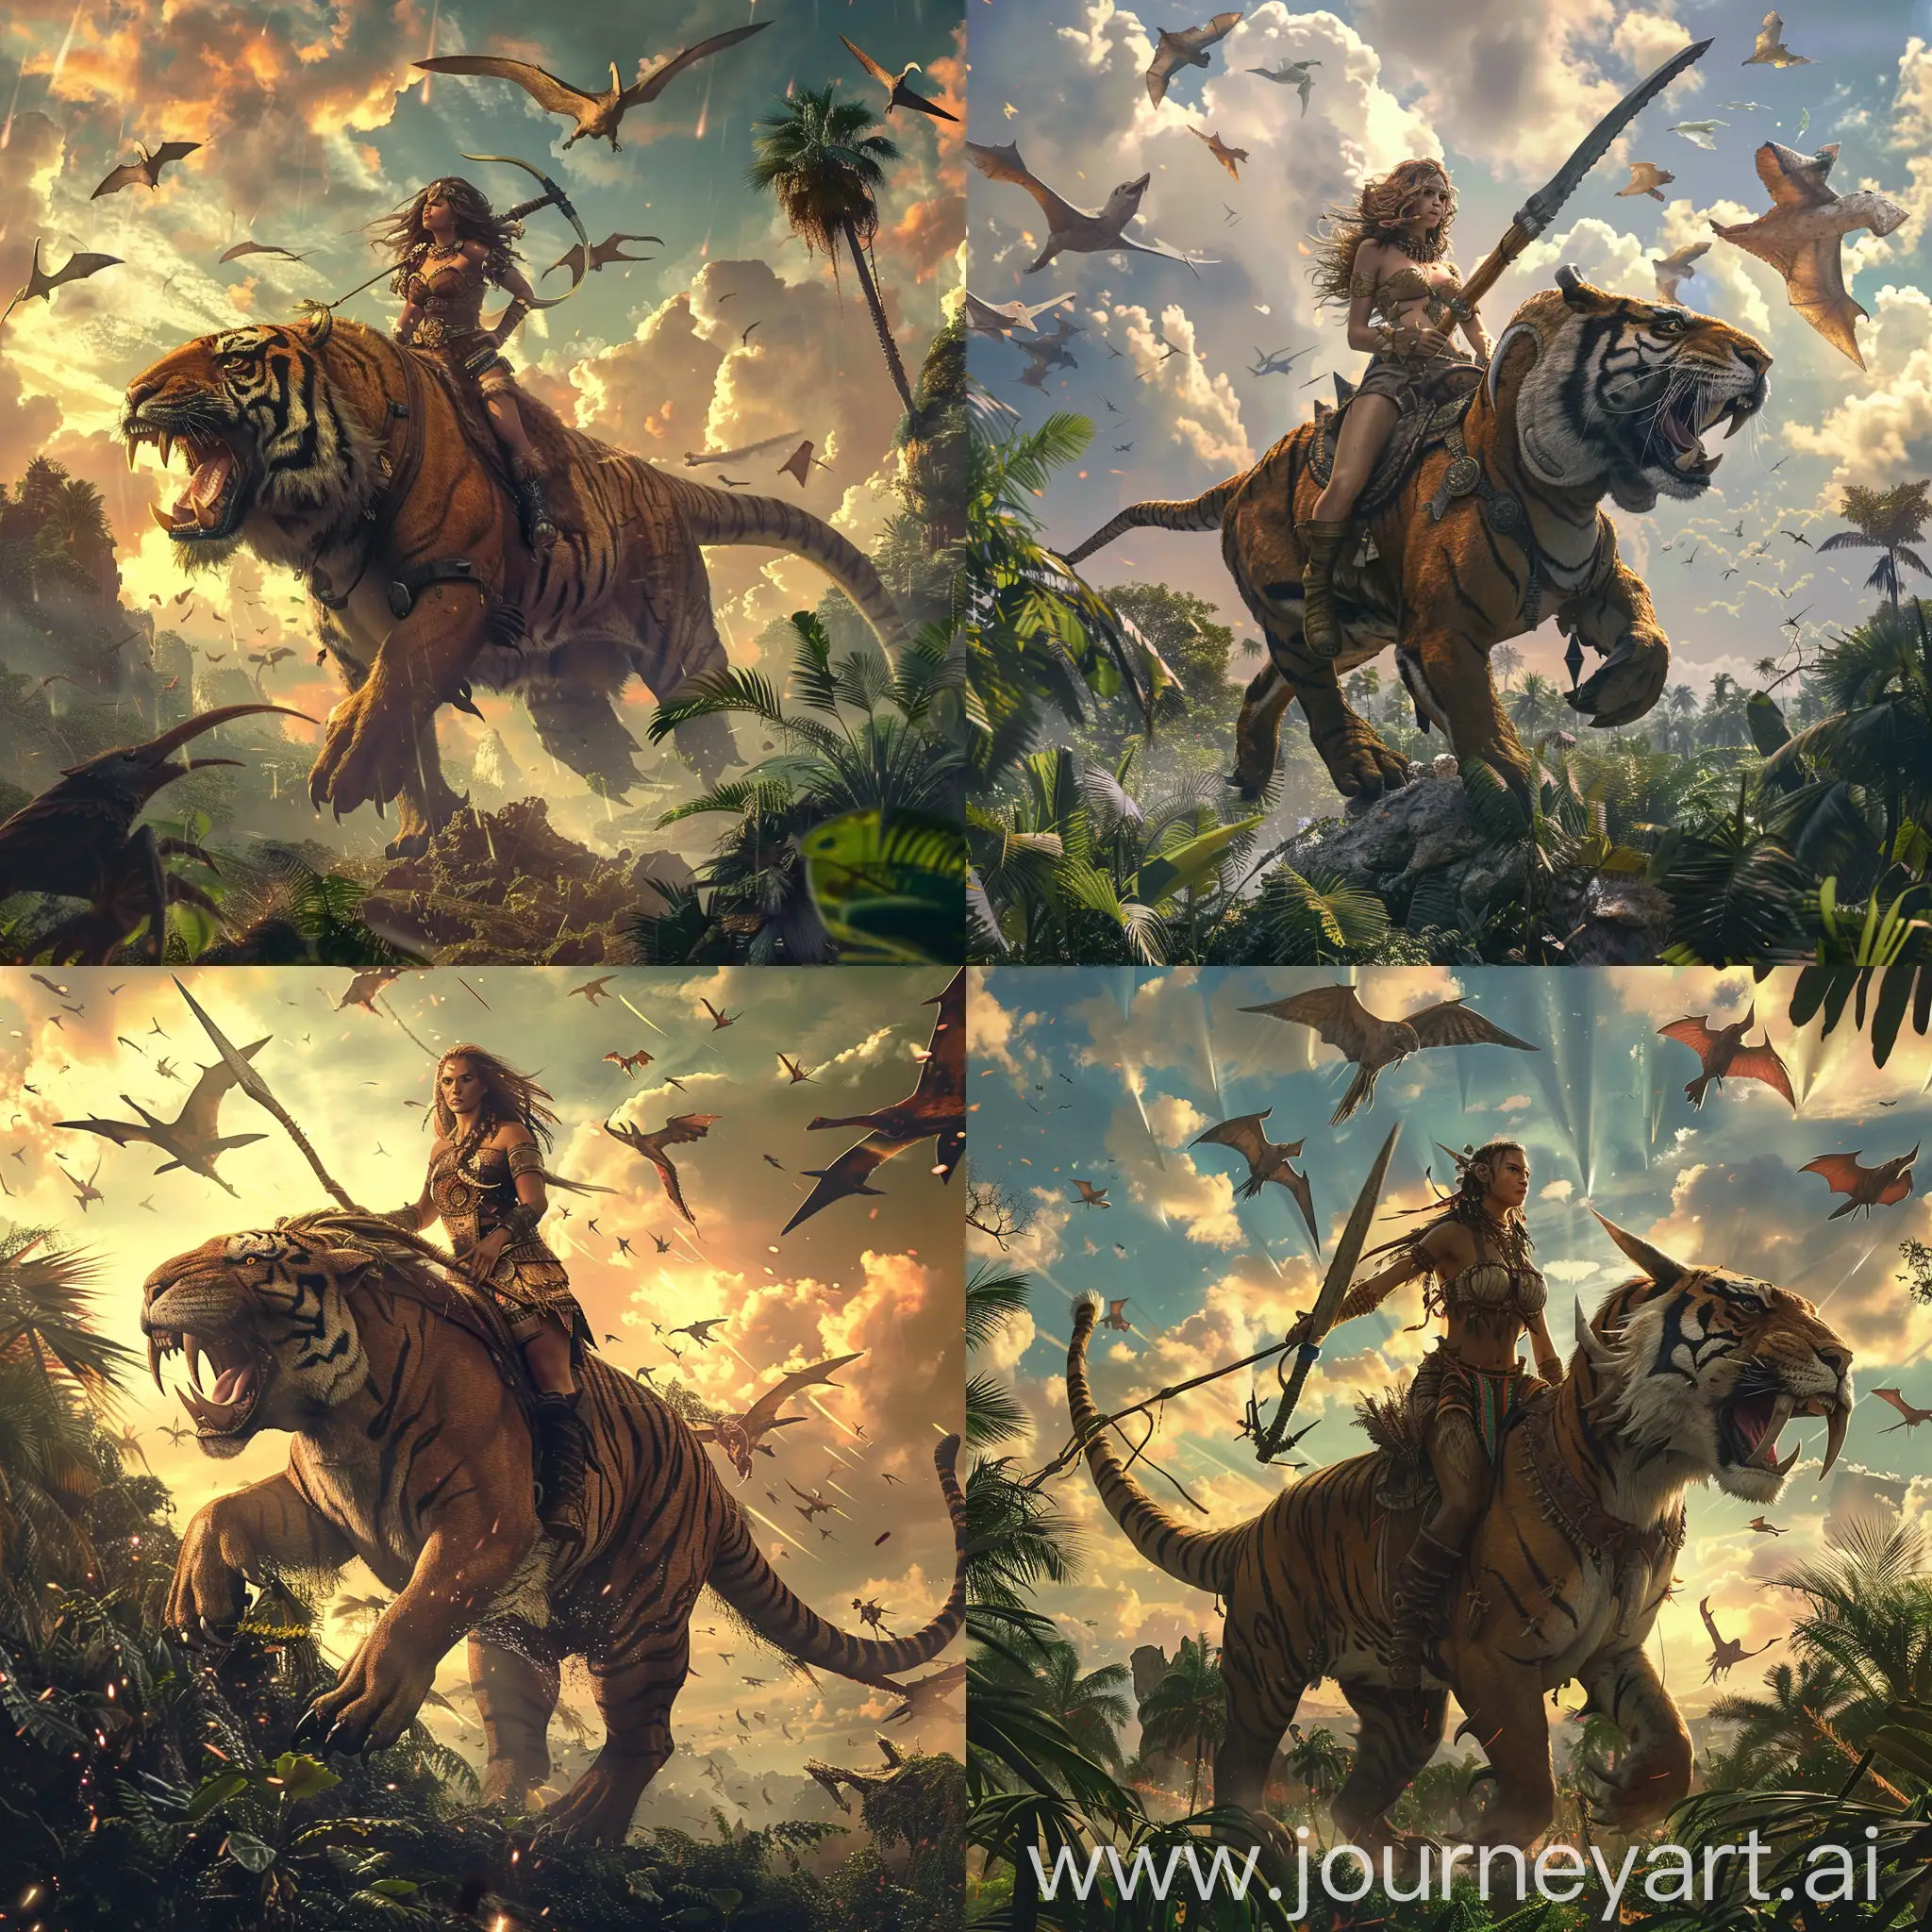 photo-realistic, a fantastic female warrior rides a large saber tooth tiger in a savage fantastic jungle, the sky is filled with. flying creatures 